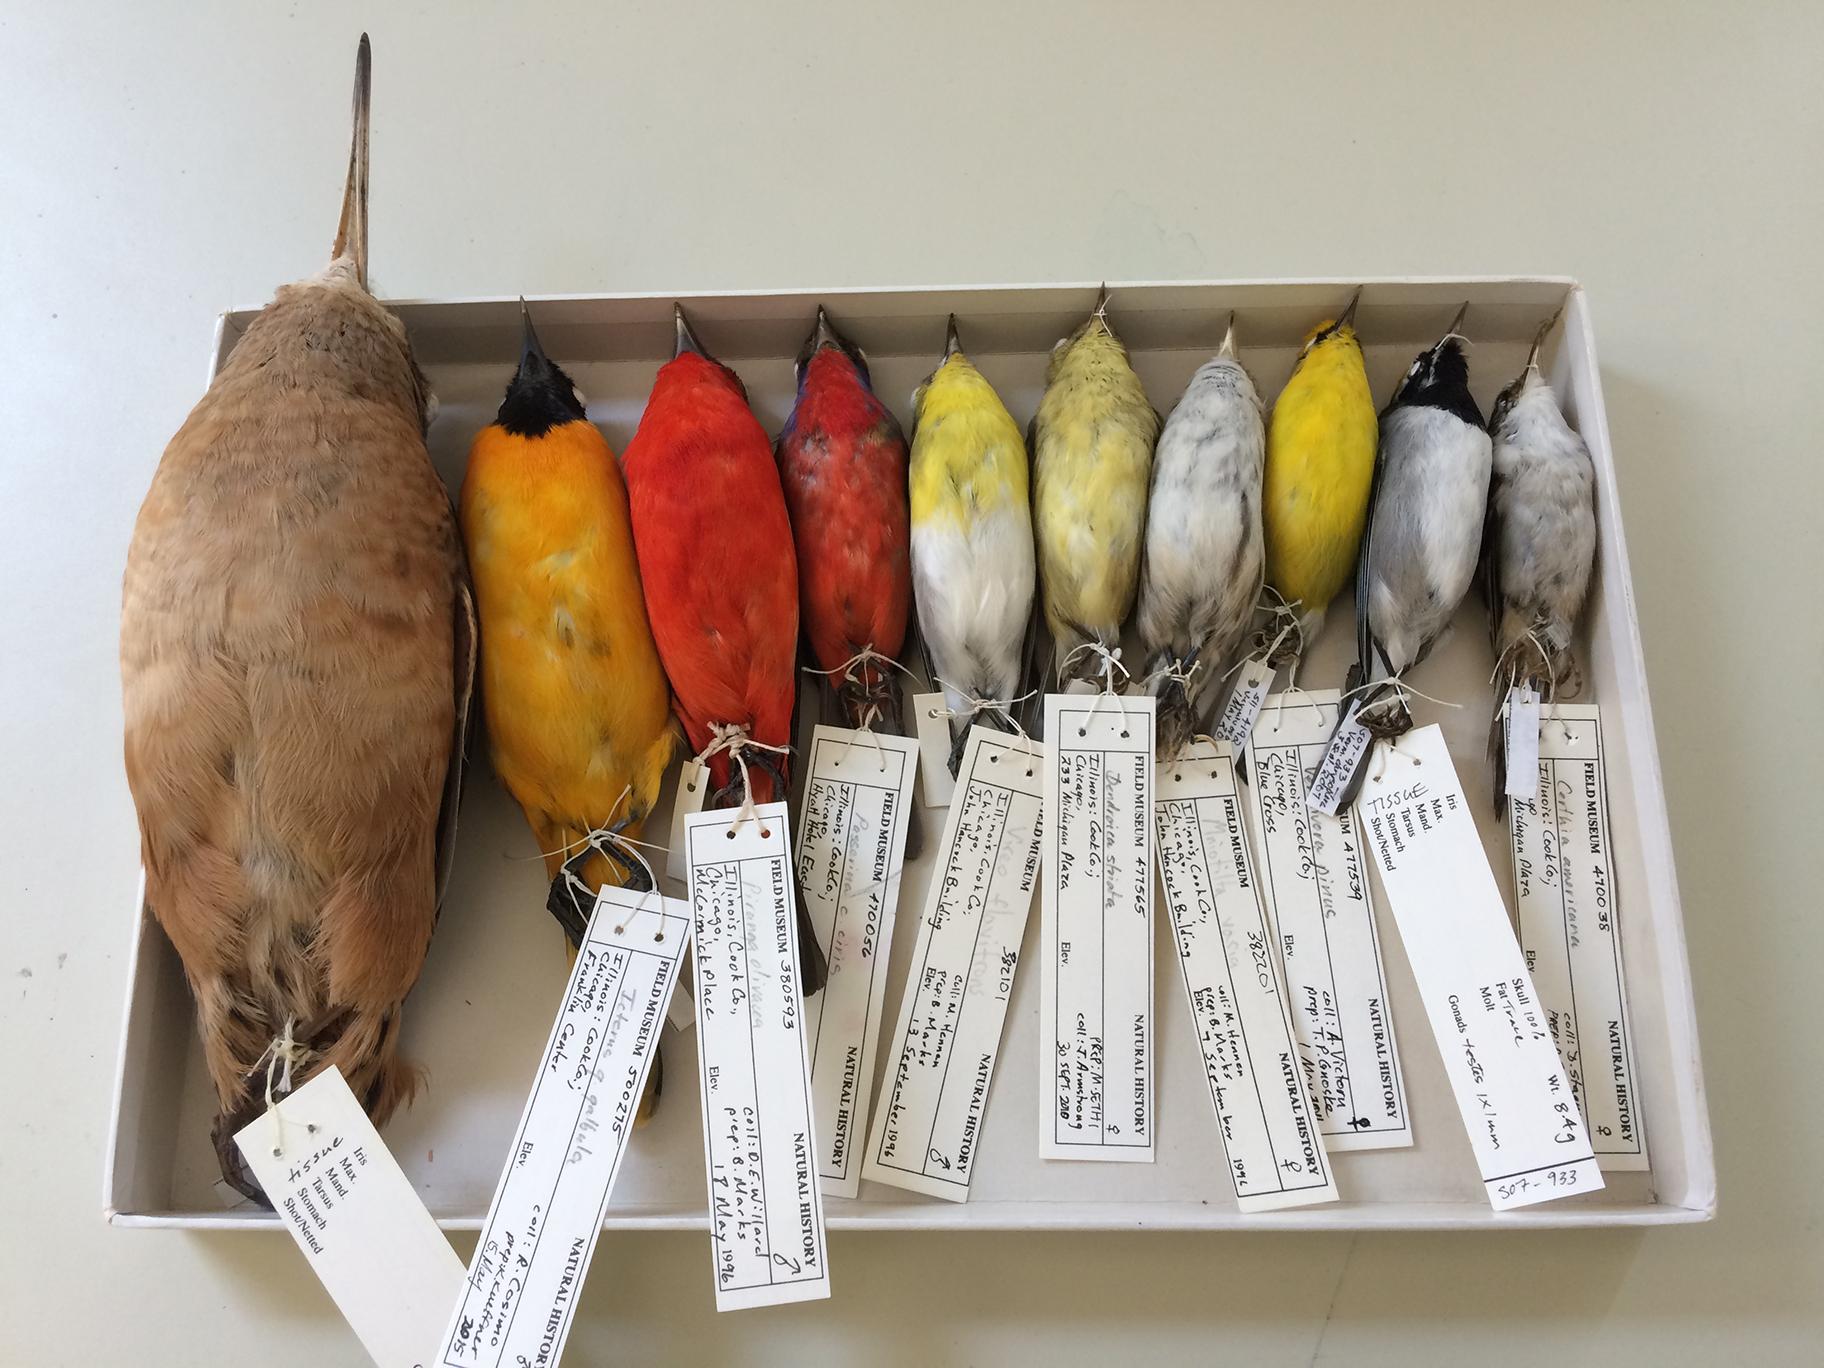 Dead birds collected by the Chicago Bird Collision Monitors and given to the Field Museum's Bird Division. (Josh Engel / The Field Museum)